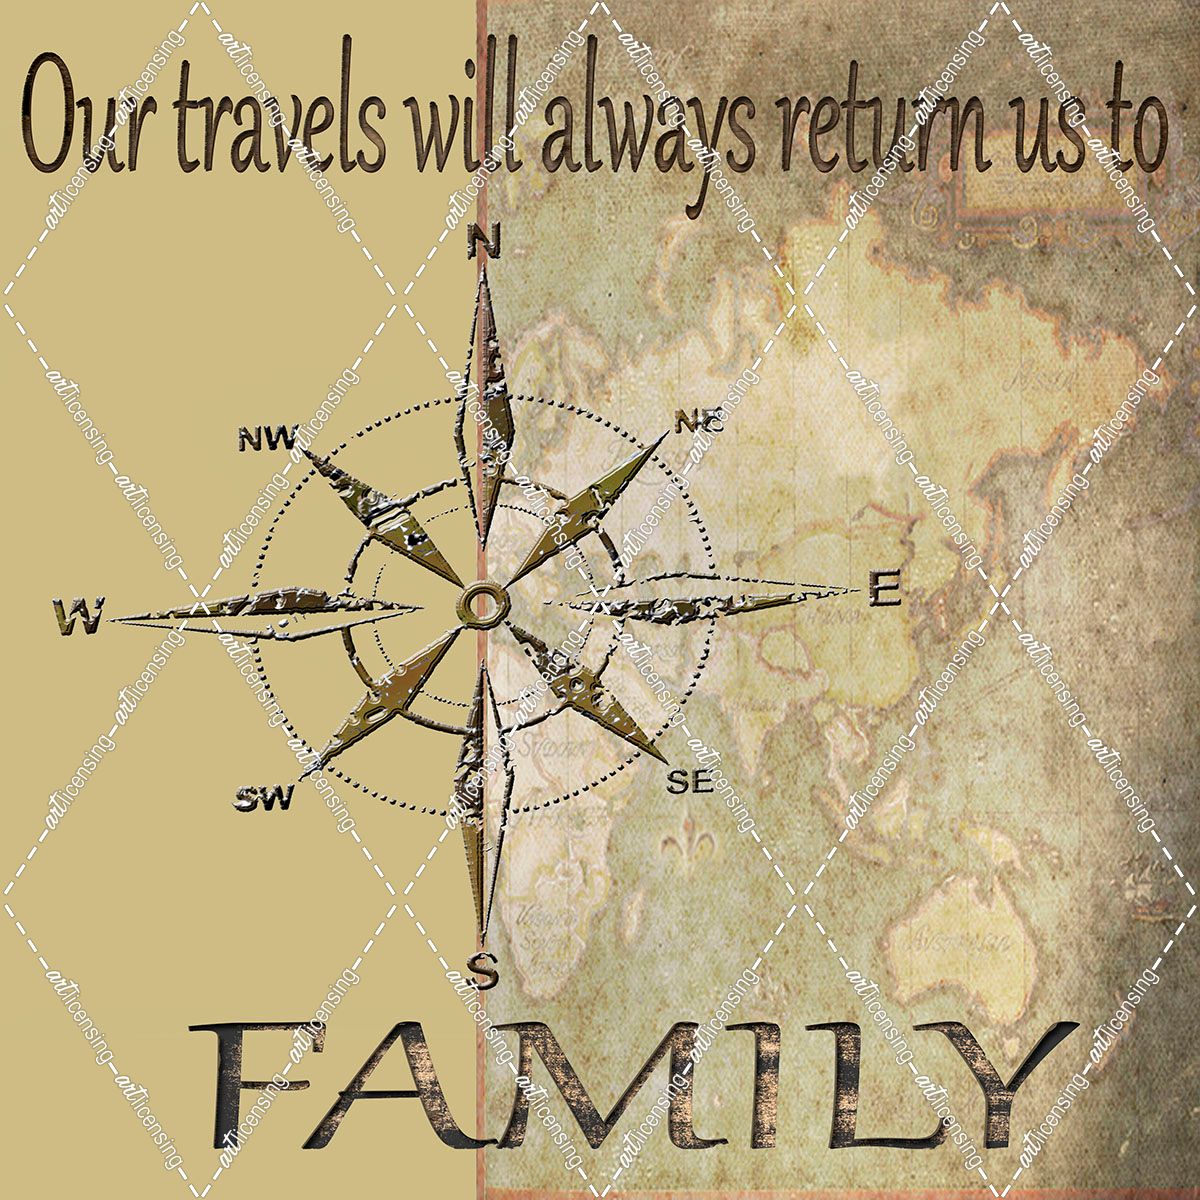 Travels lead back to Family